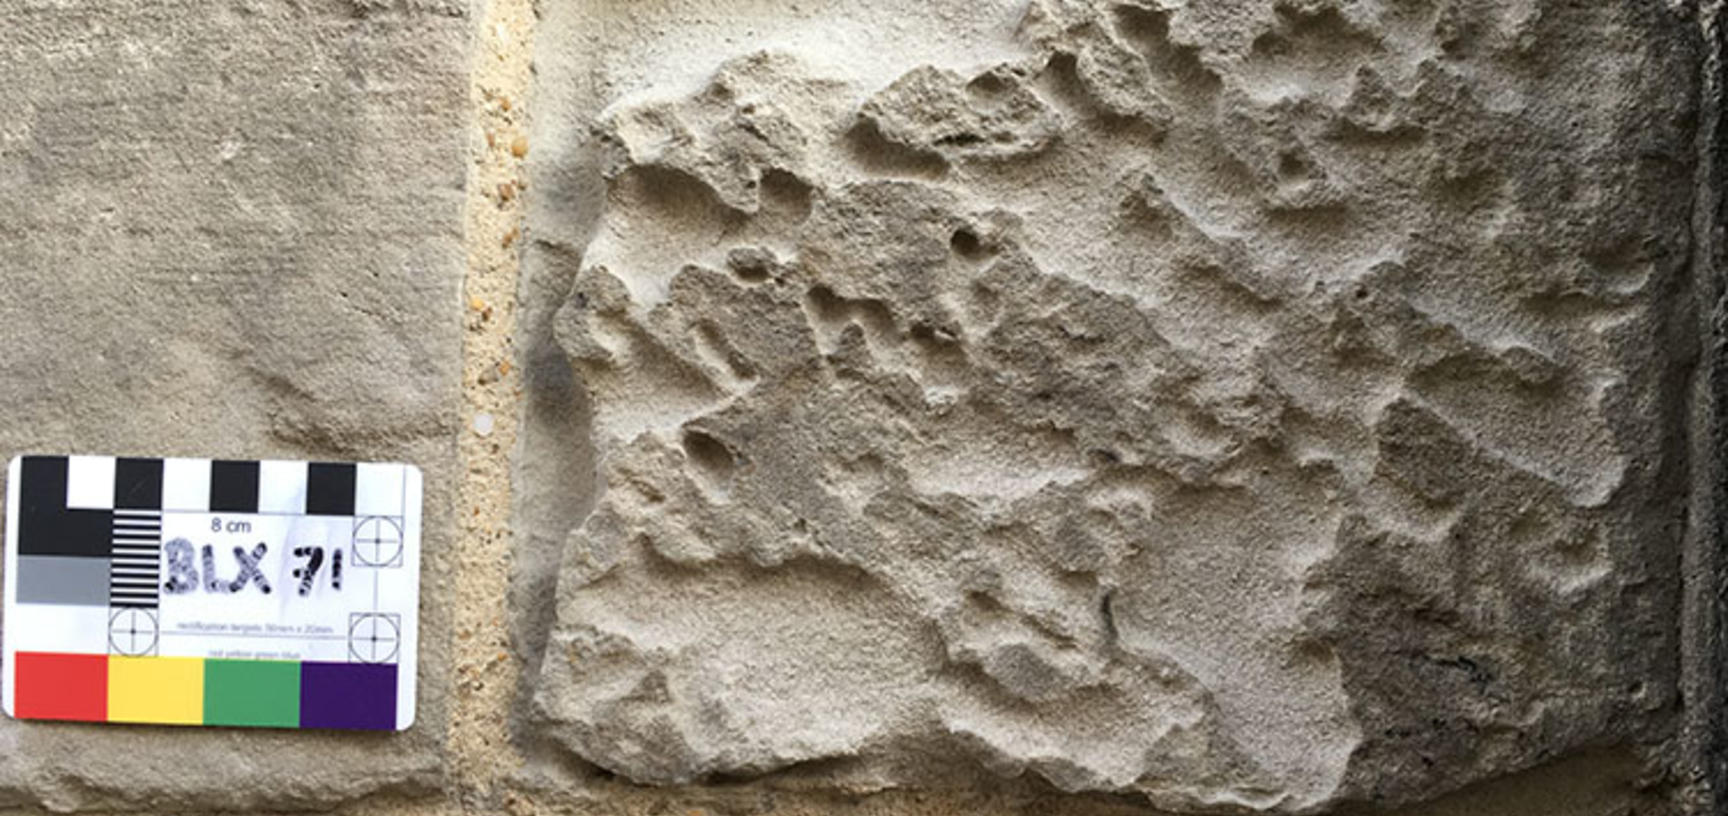 Powdering Reigate Stone at the Bell Tower, Tower of London